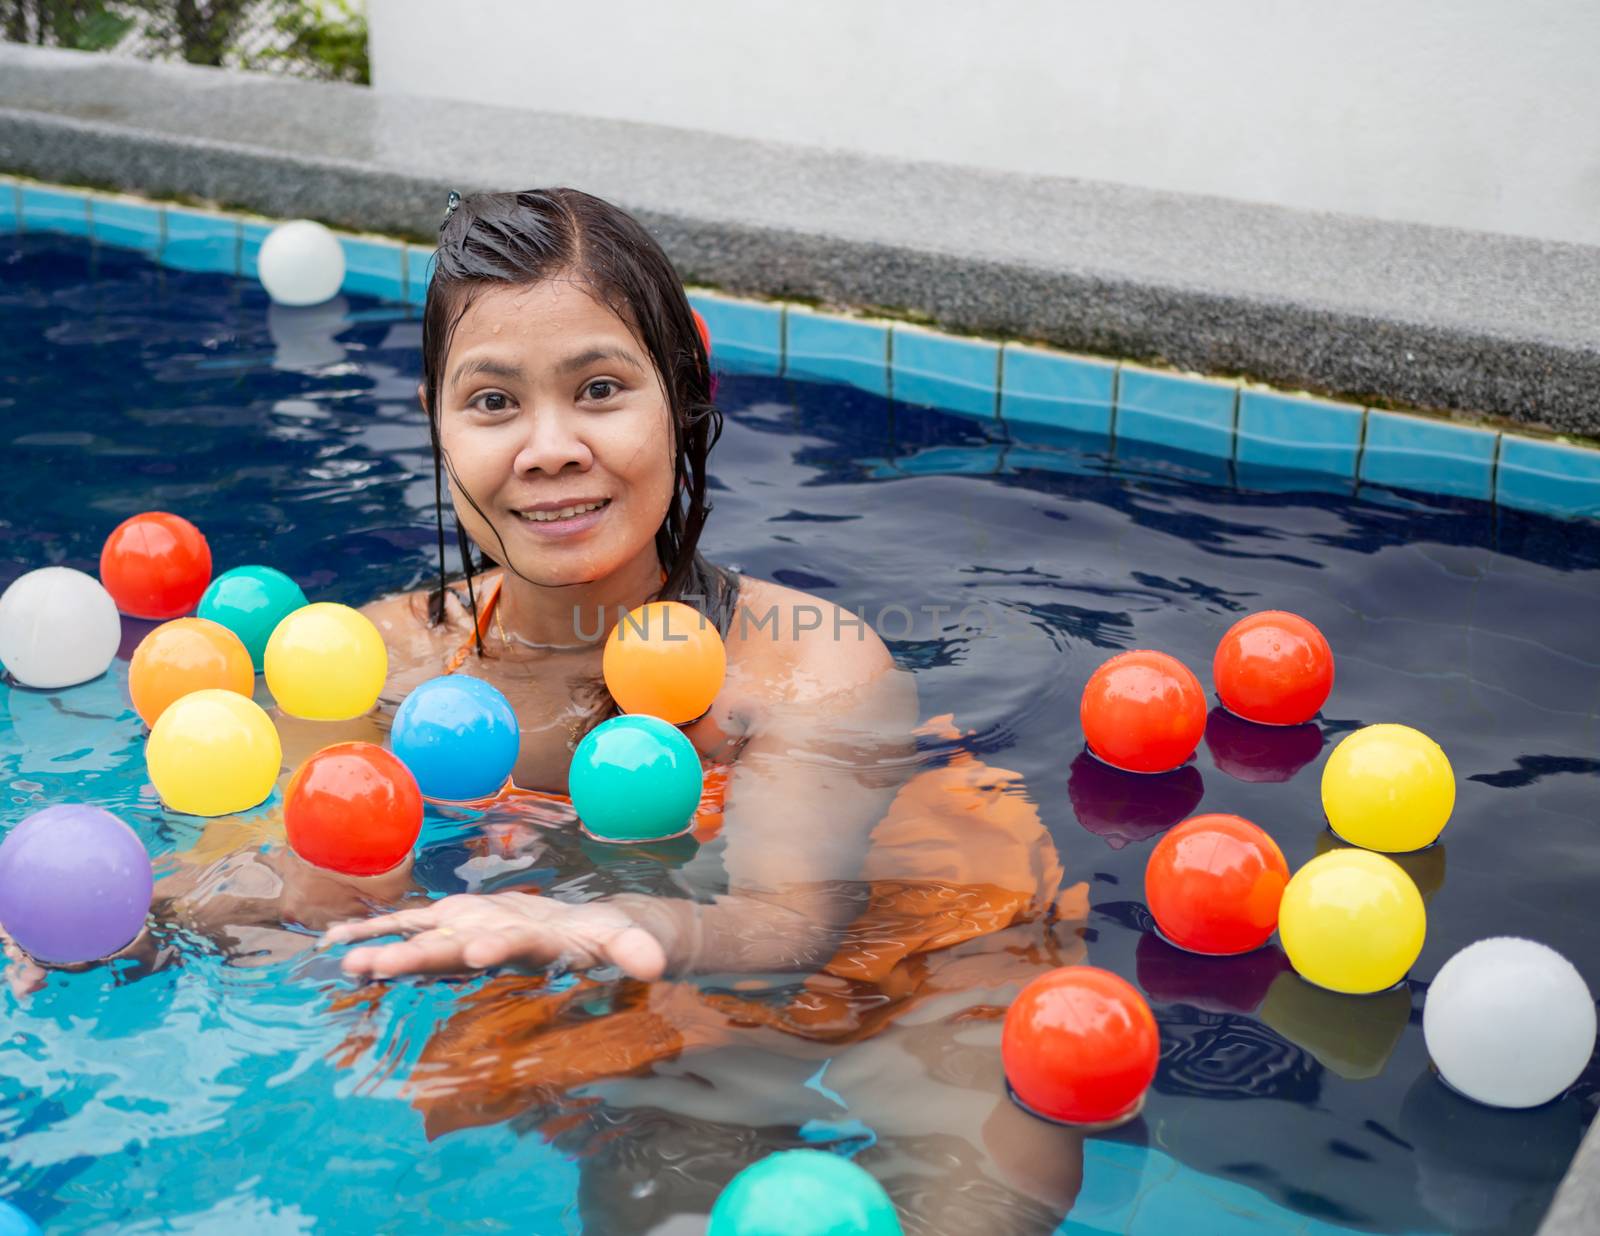 A woman playing in the ball in the pool